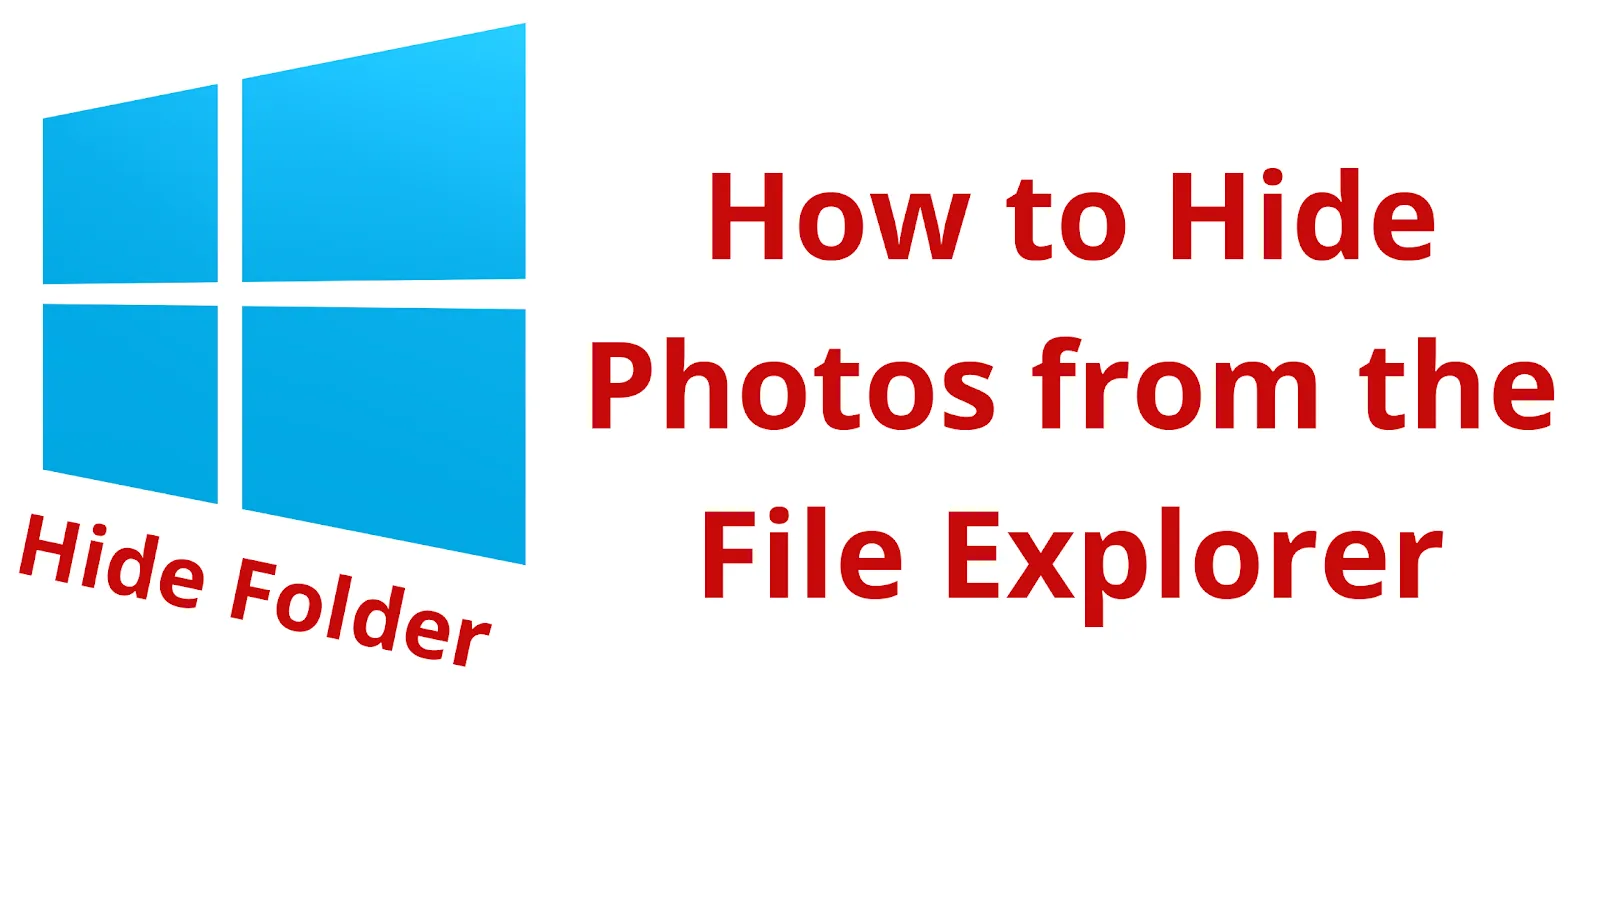 Hide Photos from the File Explorer